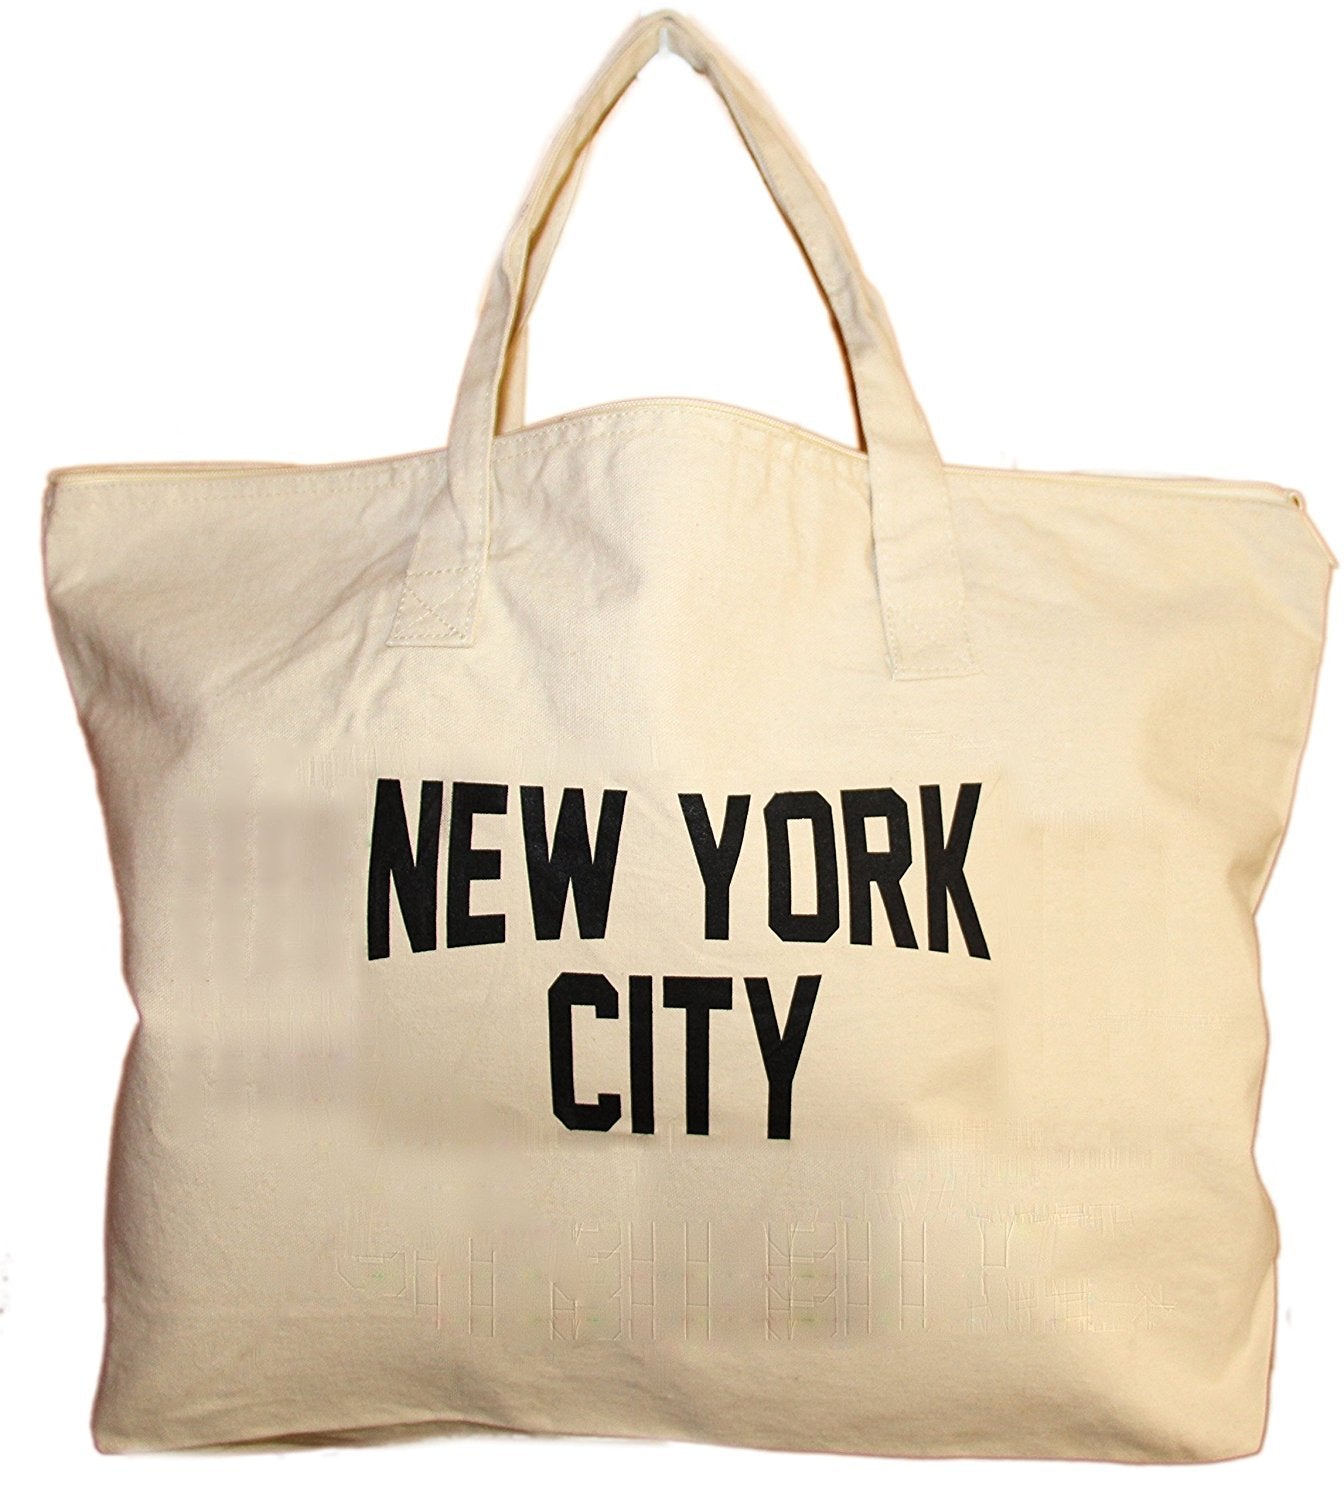 NYC Zippered Tote Bag 100% Cotton Canvas New York City Beach Shopping Gym by